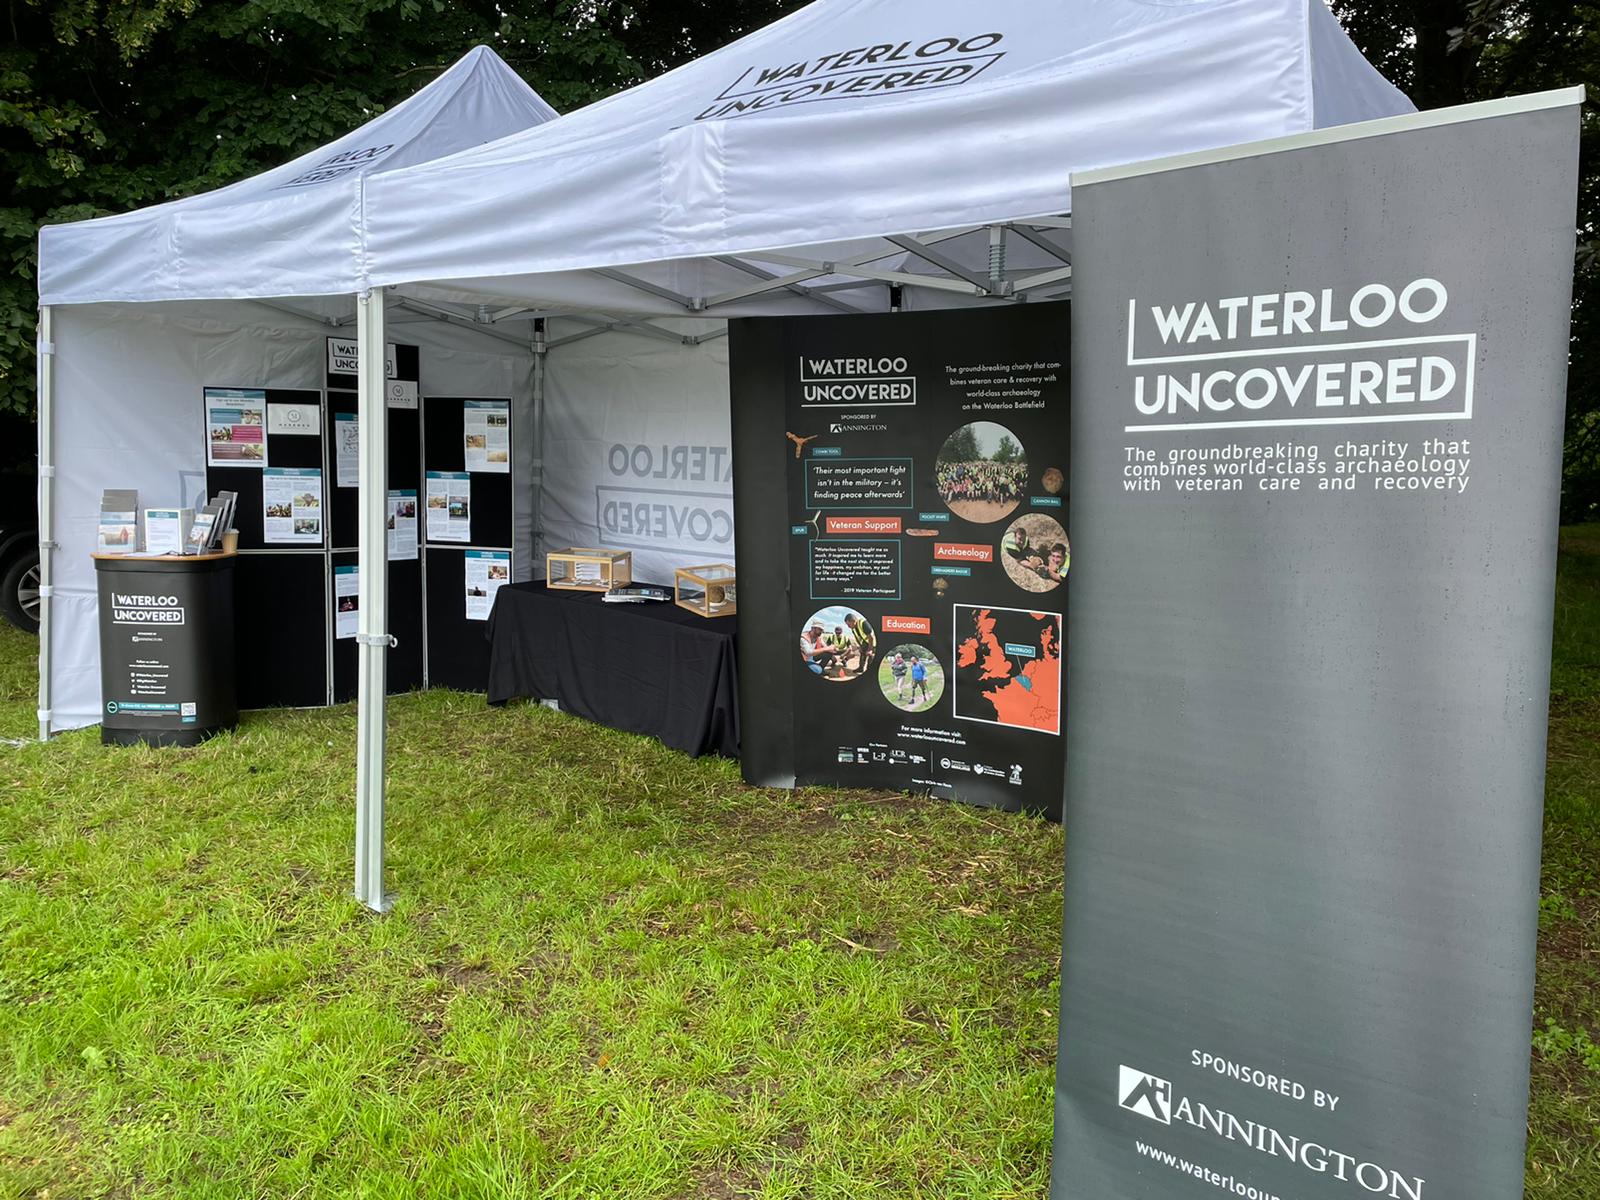 Waterloo Uncovered's stand at the Stansted Unlocked event